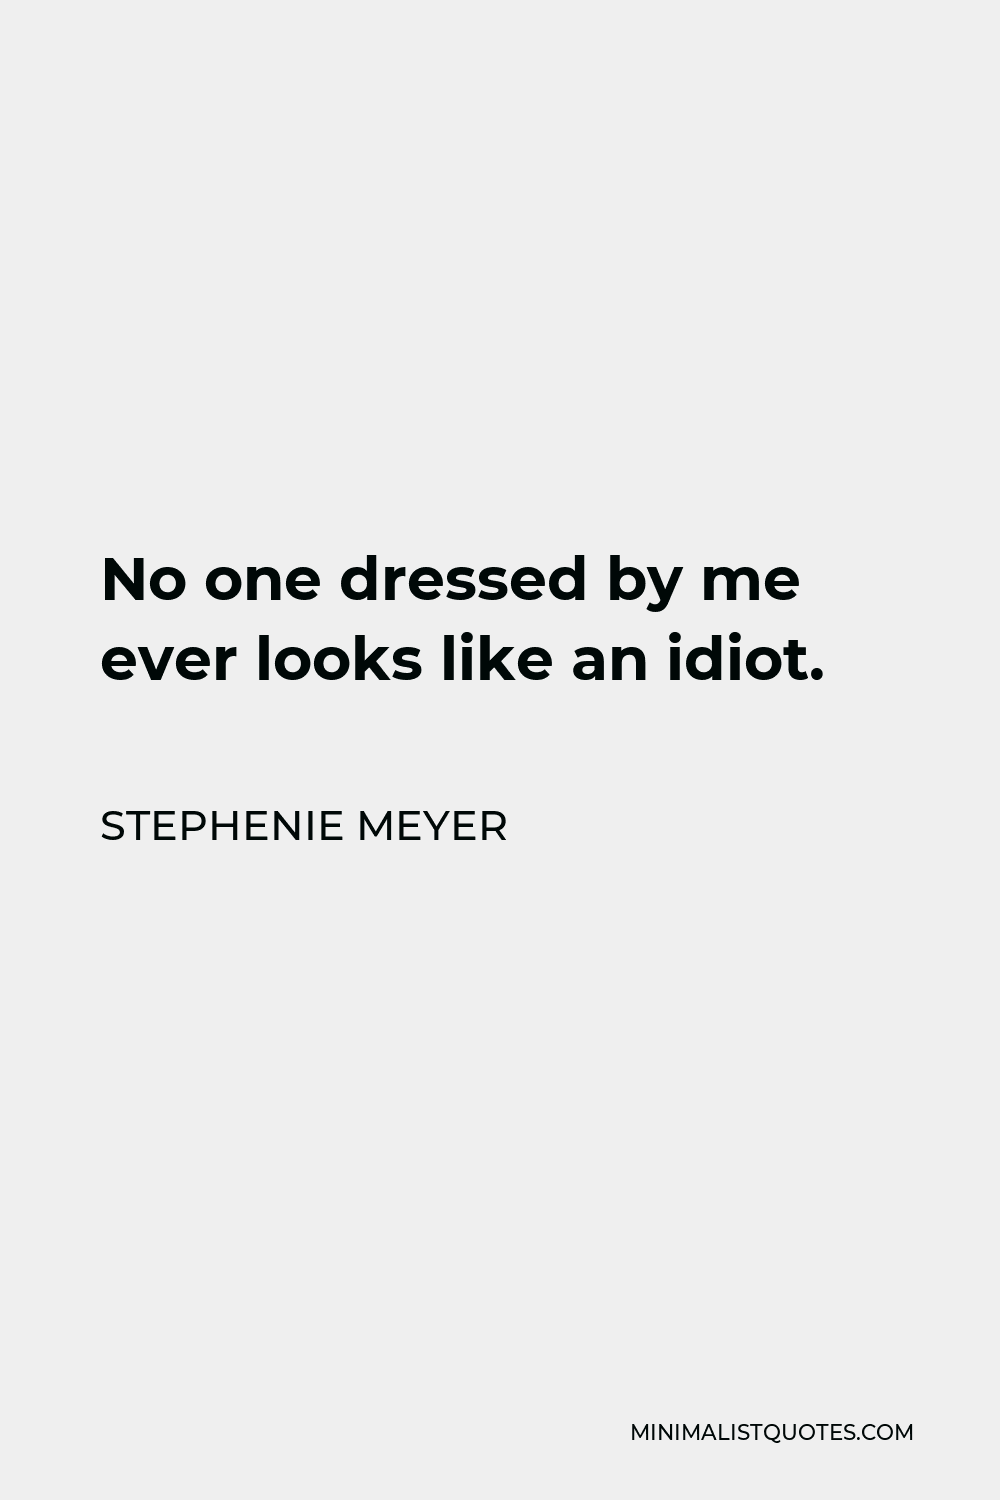 Stephenie Meyer Quote - No one dressed by me ever looks like an idiot.